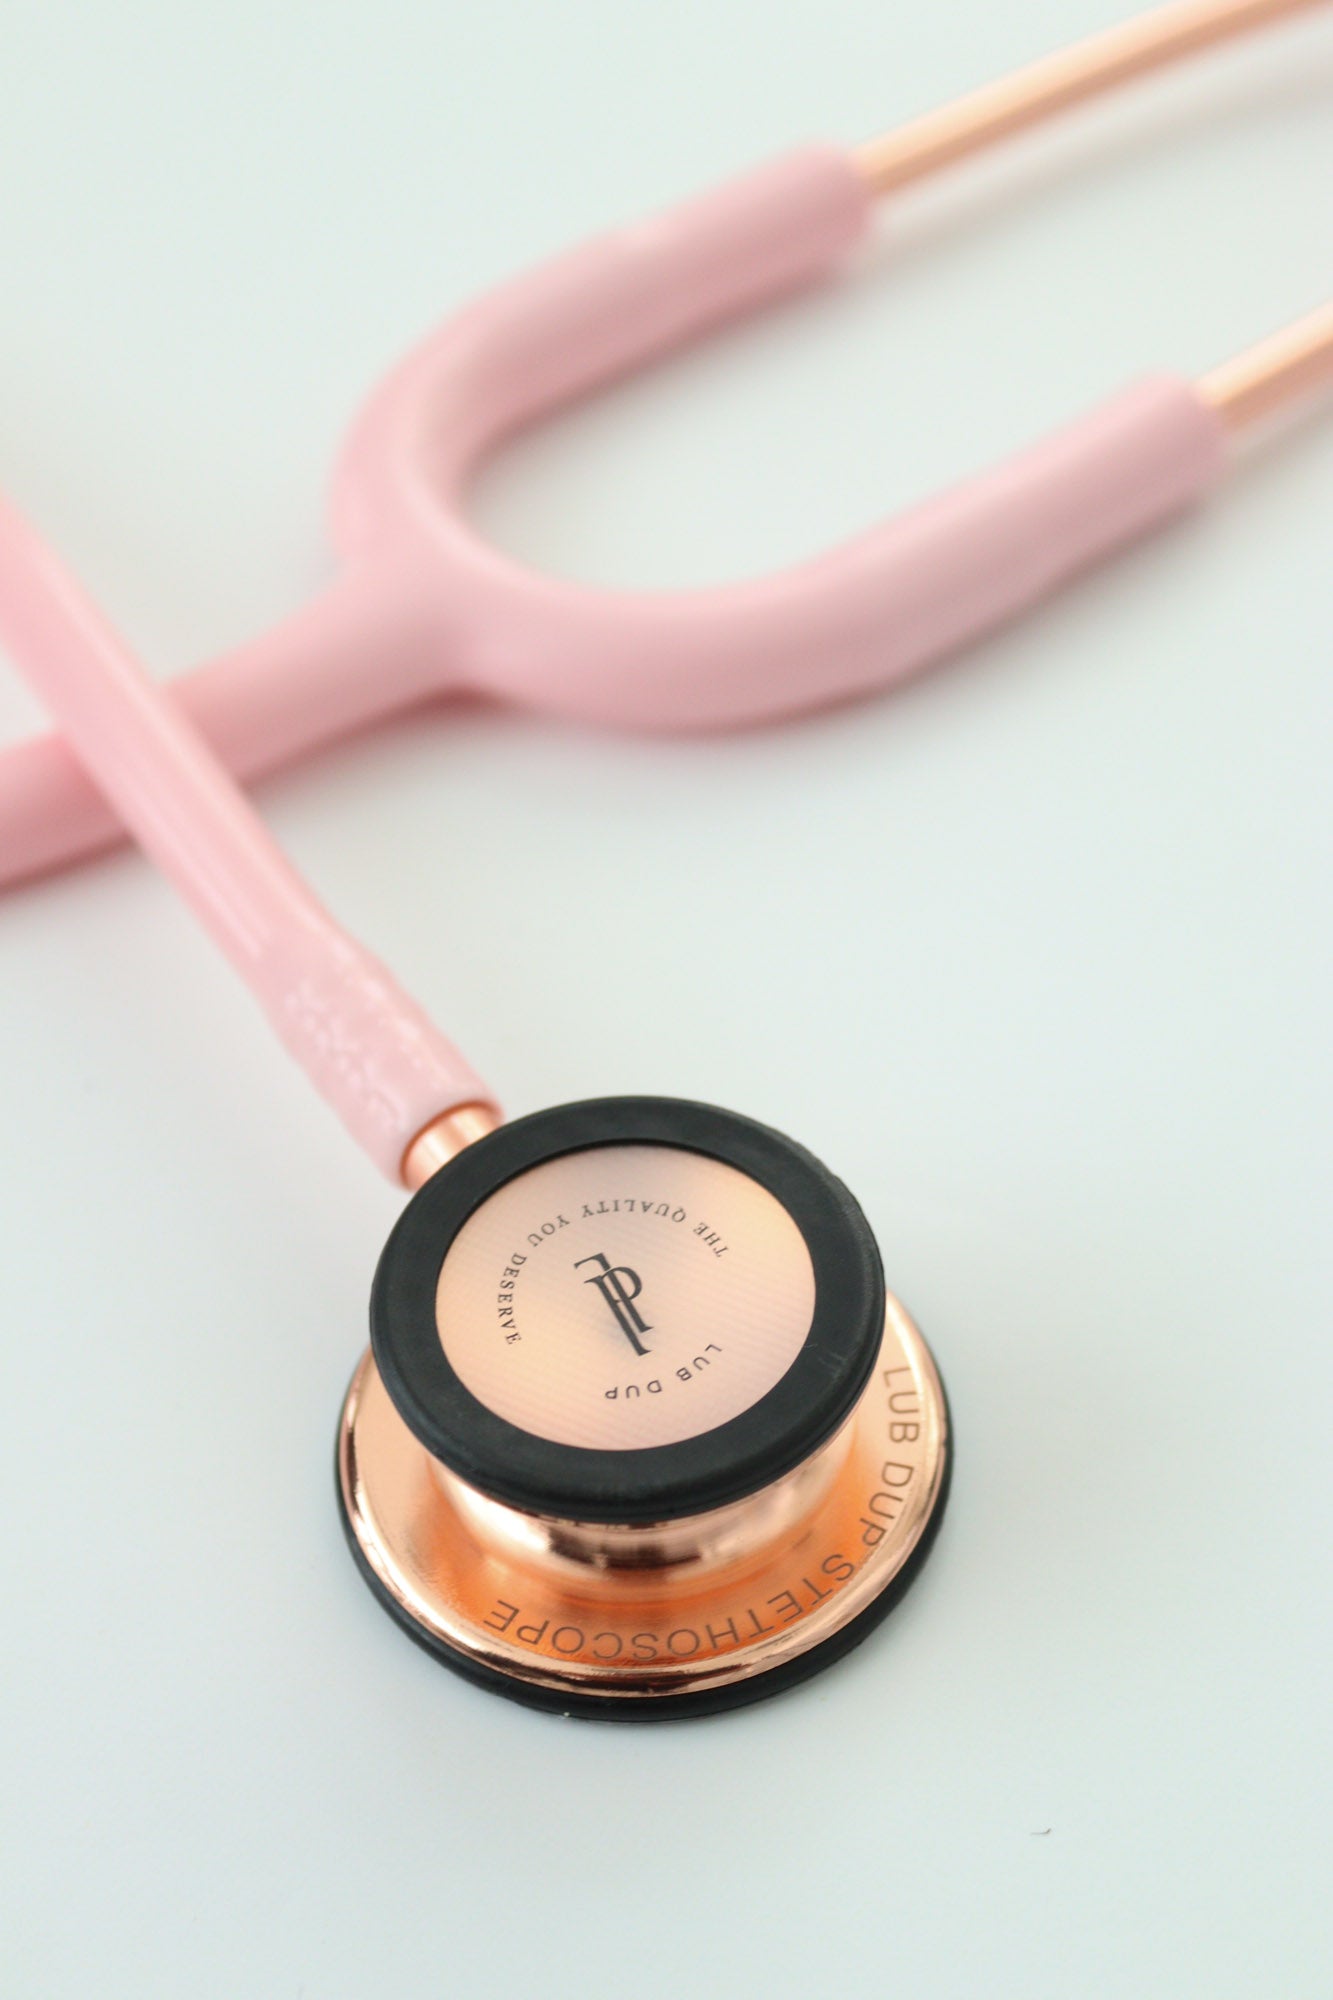 Lub Dup Adult Stethoscope - Light Pink-Rose Gold Edition